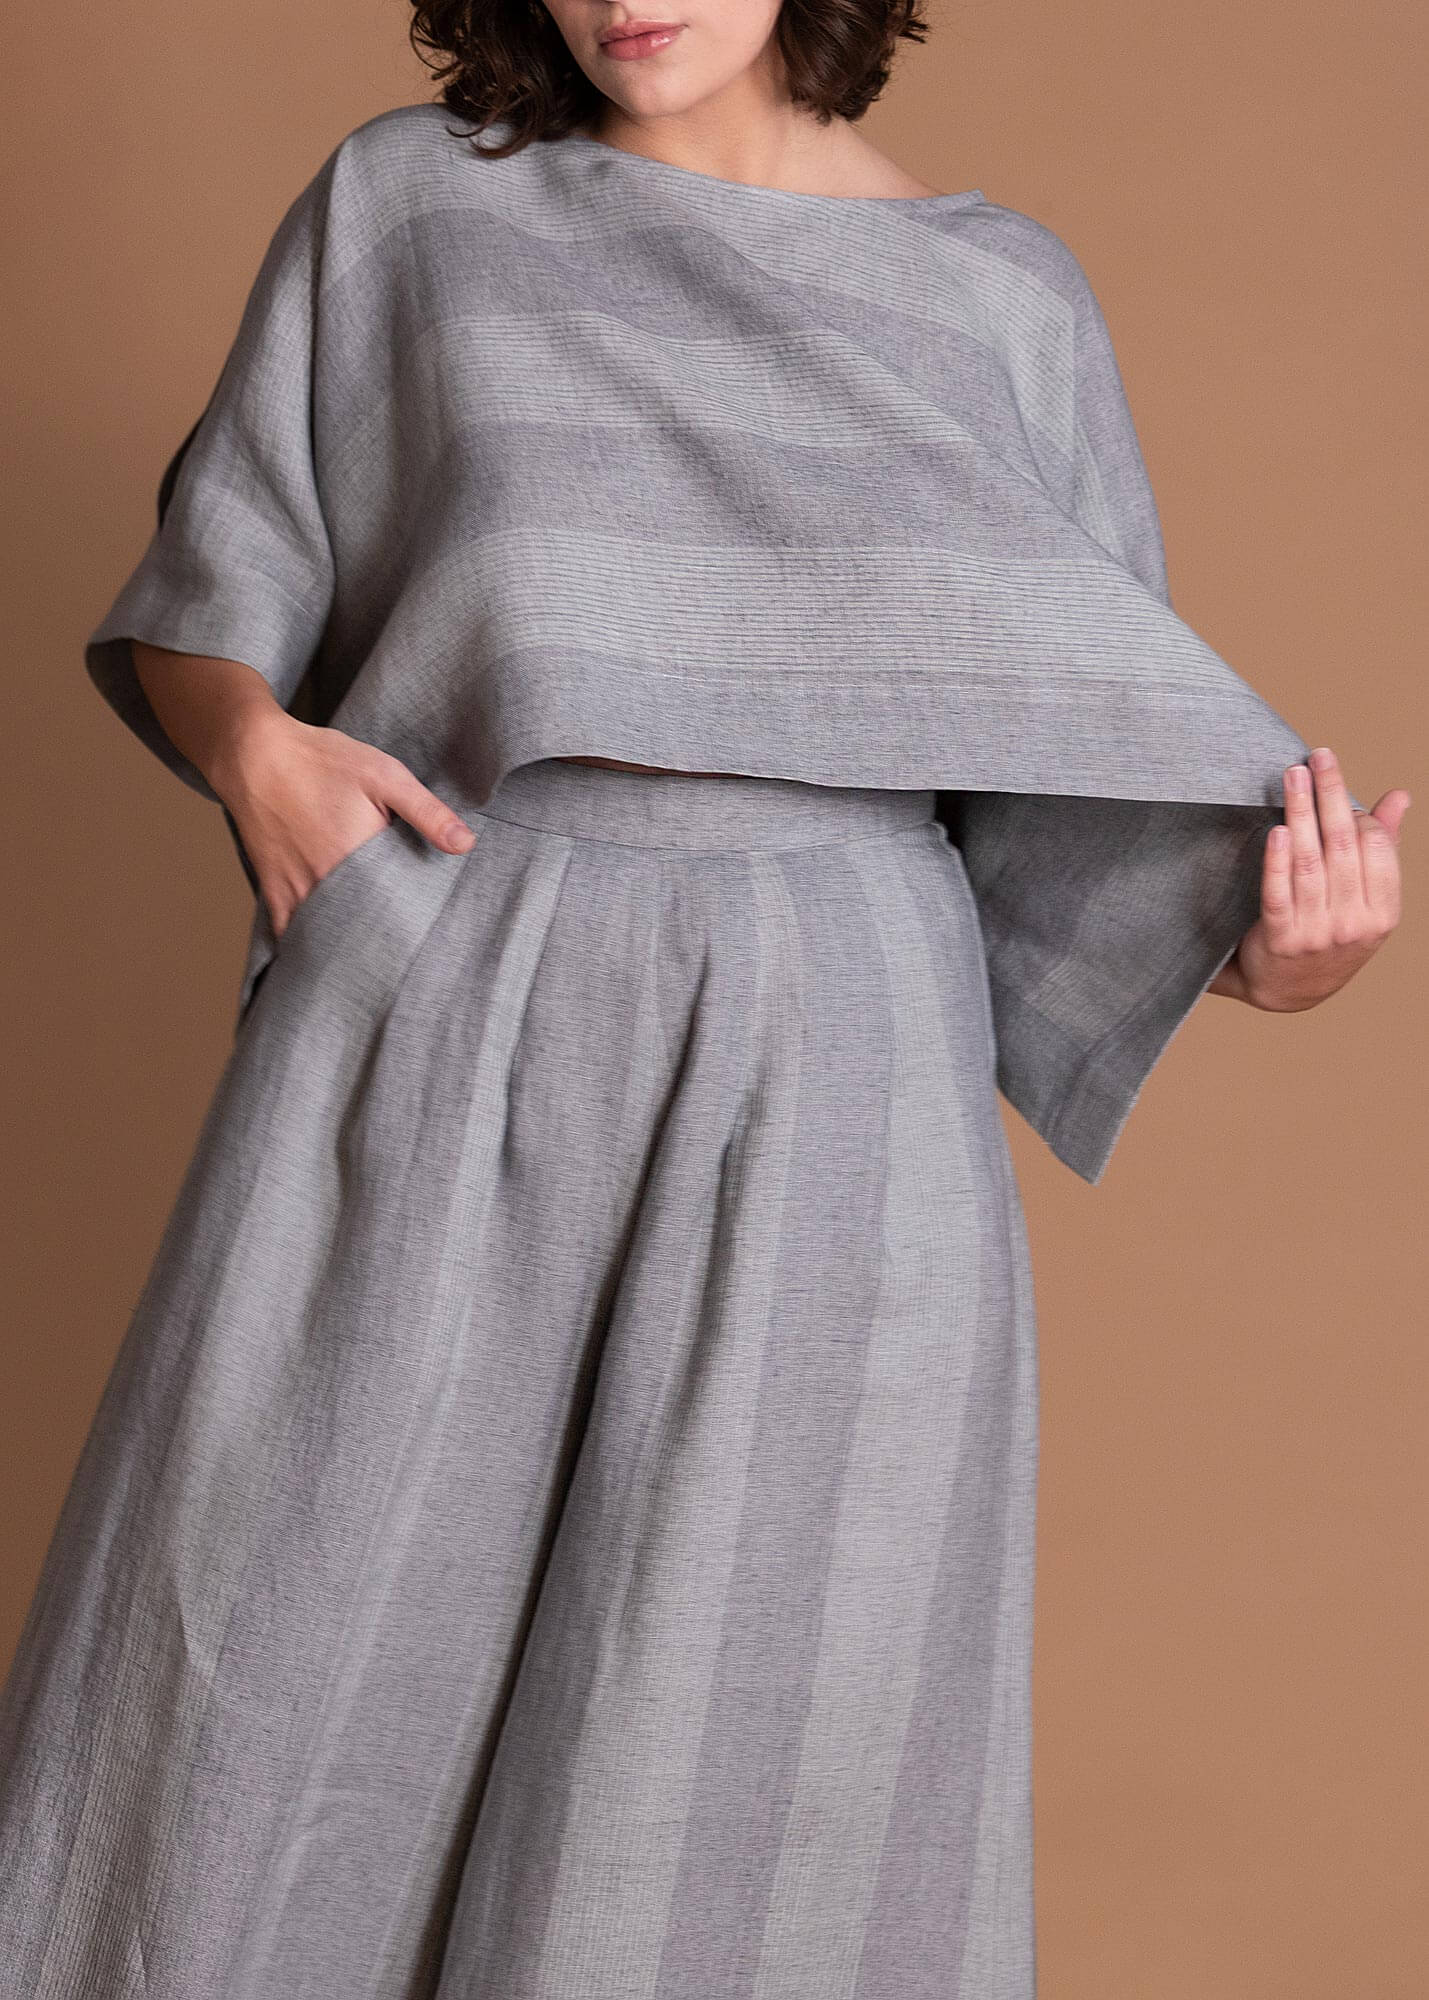 Gray Loose Fitting Maxi Linen Pants With Zipper And Pockets